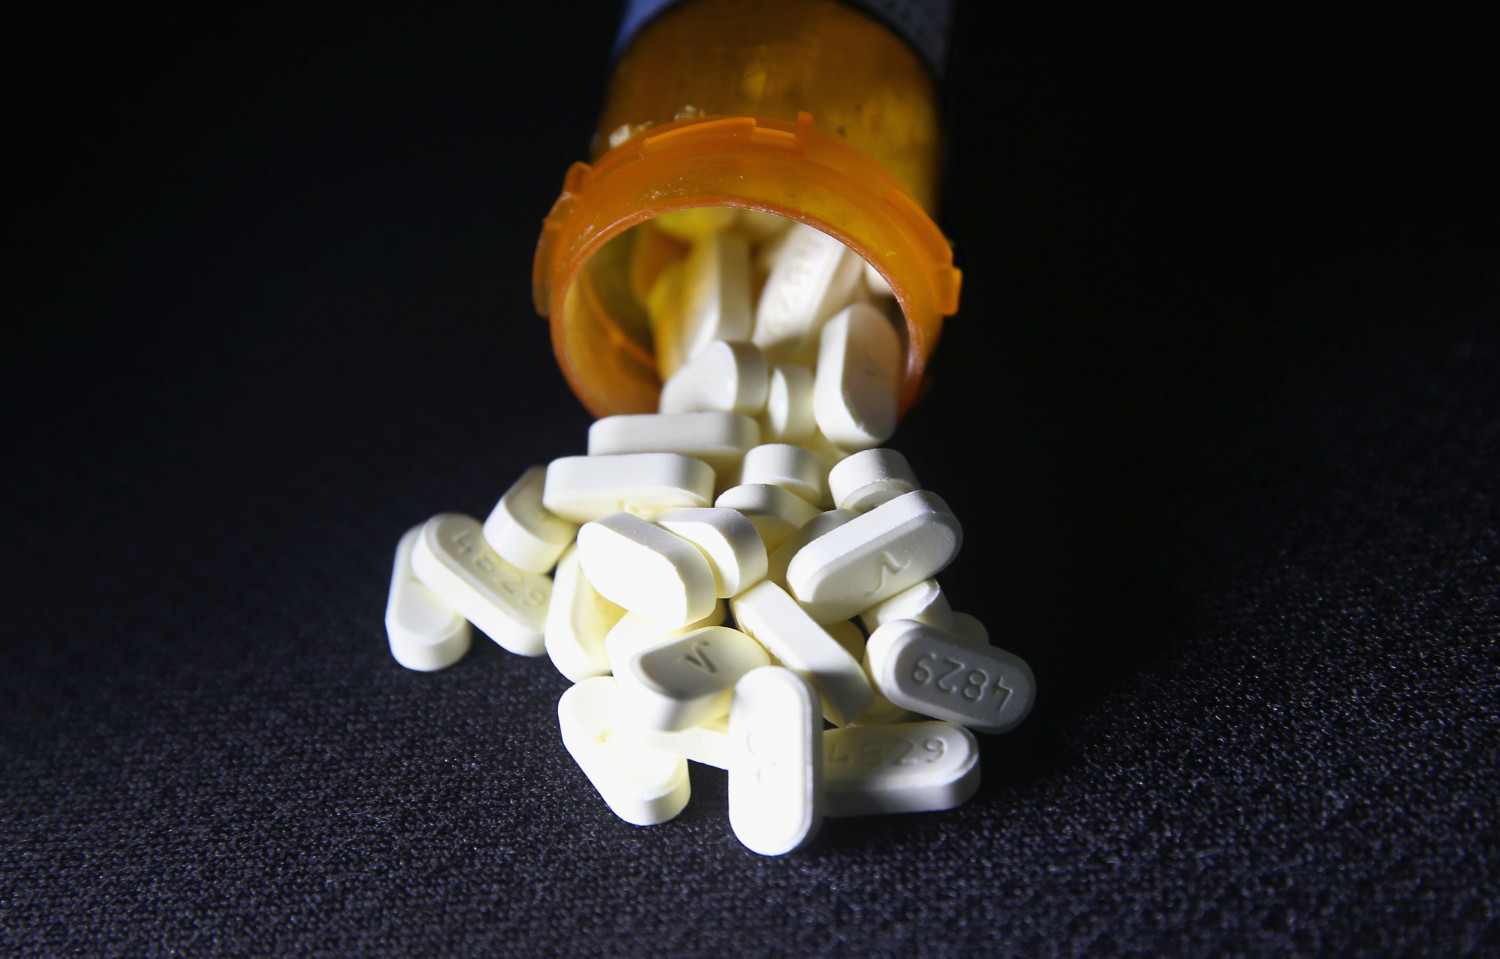 Congressional Report Finds Millions of Opioids Sent to Small-Town Pharmacies in West Virginia